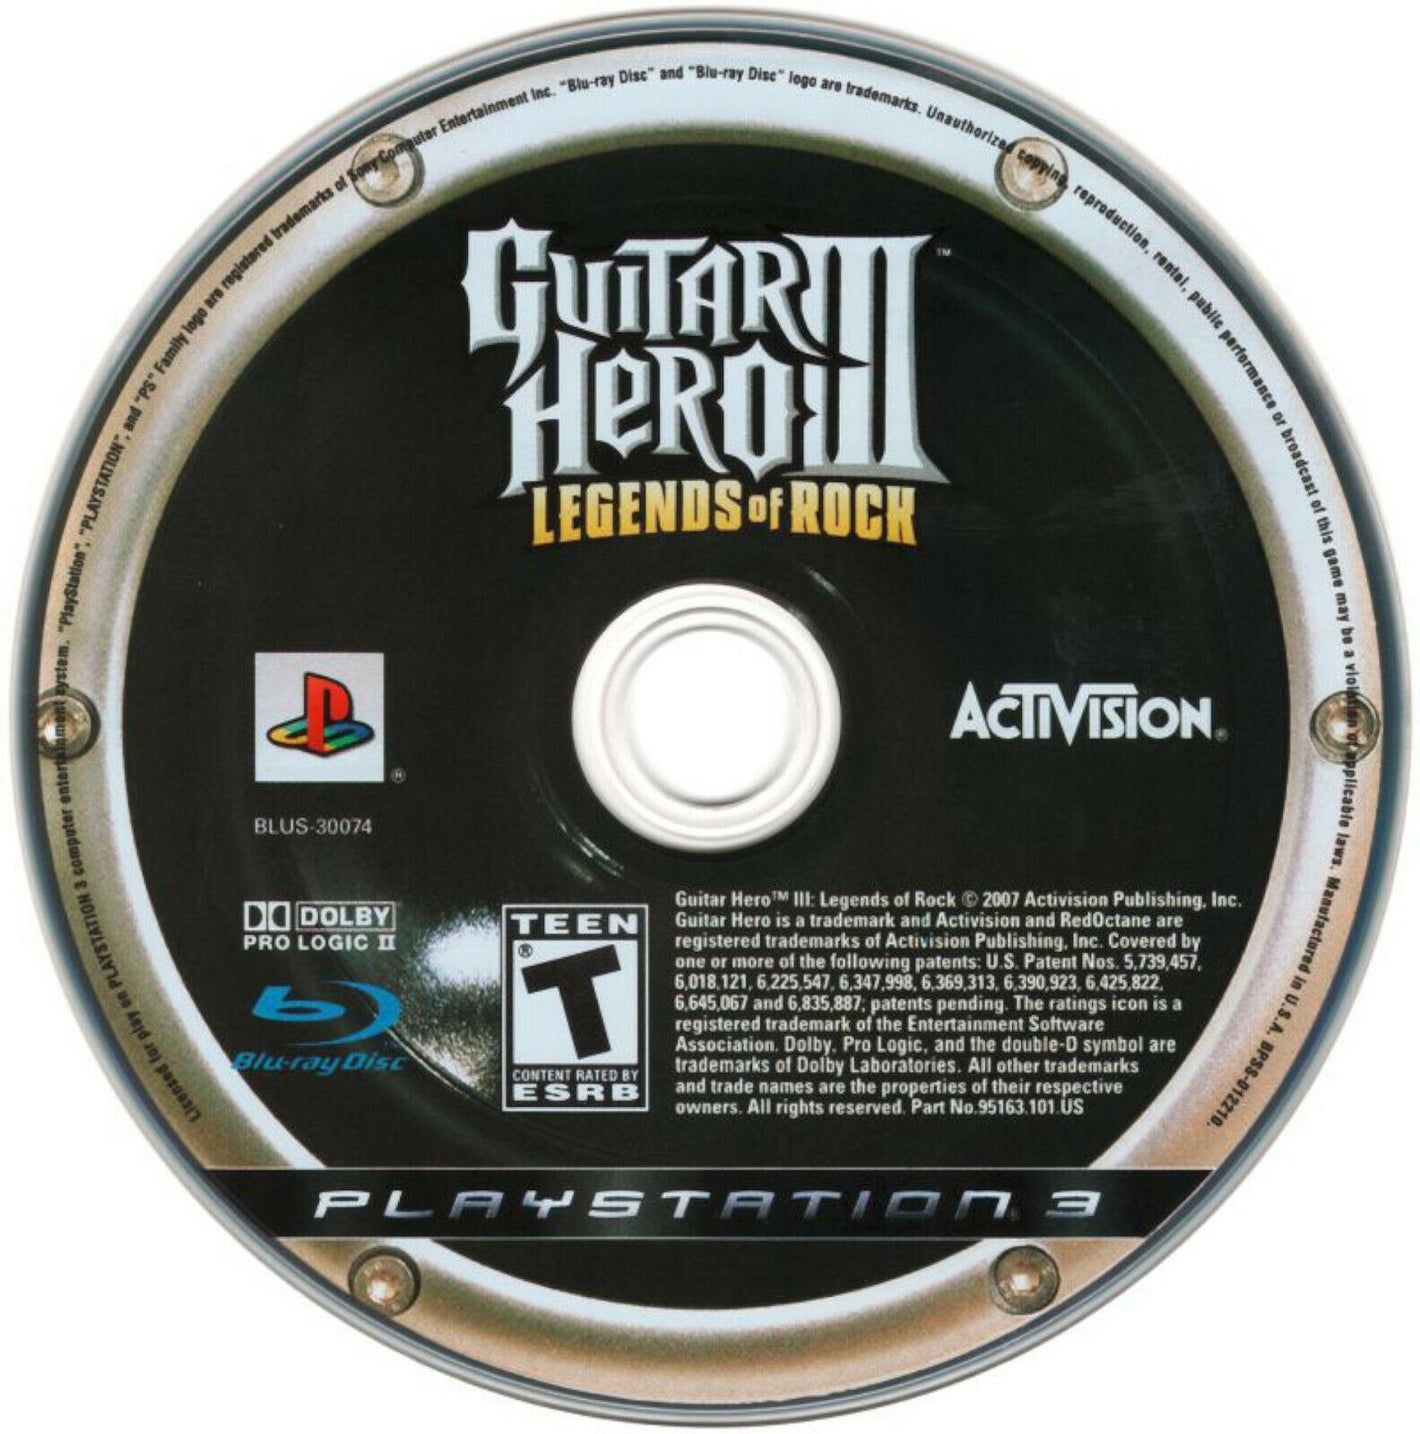 Guitar Hero III Legends of Rock Sony PS3 PlayStation 3 Video Game DISC ONLY [Used/Refurbished]